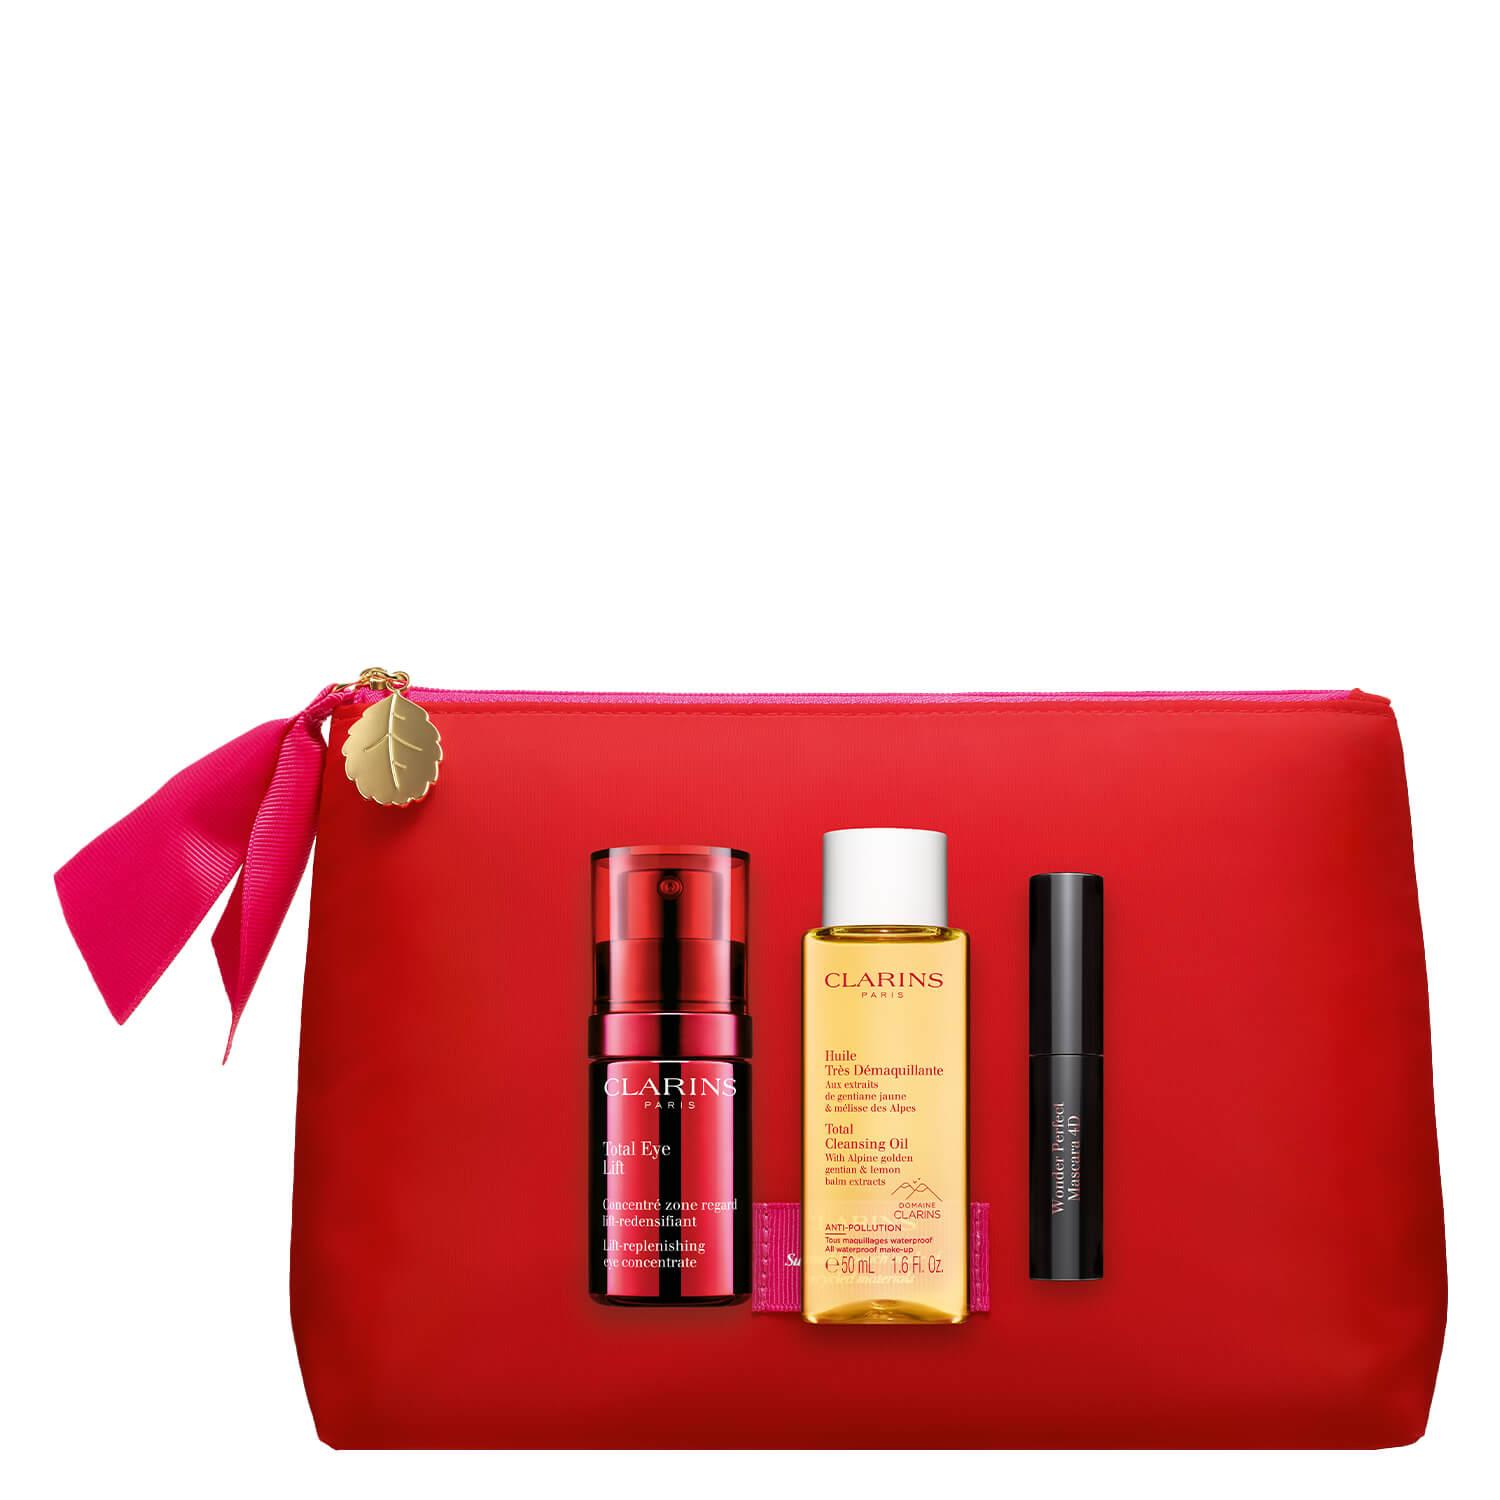 Clarins Specials - Total Eye Lift Kit